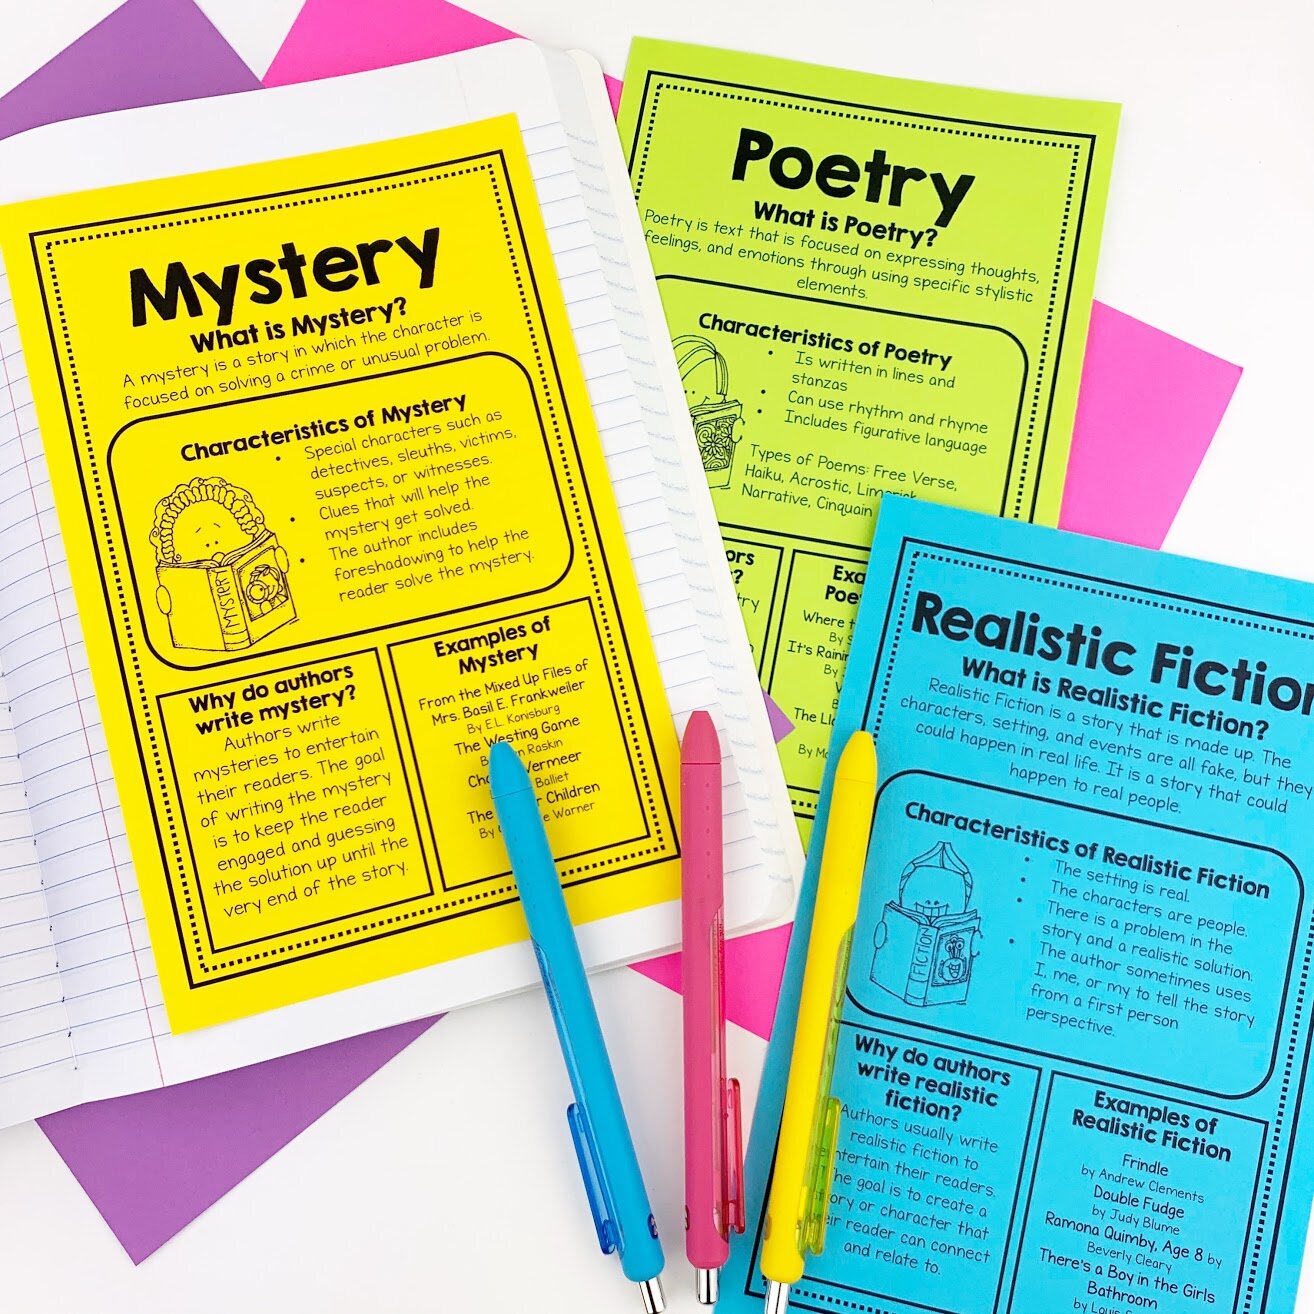 Anchor charts for teaching genre to your students. Image shows anchor cahrts for mystery, poetry, realistic fiction. 